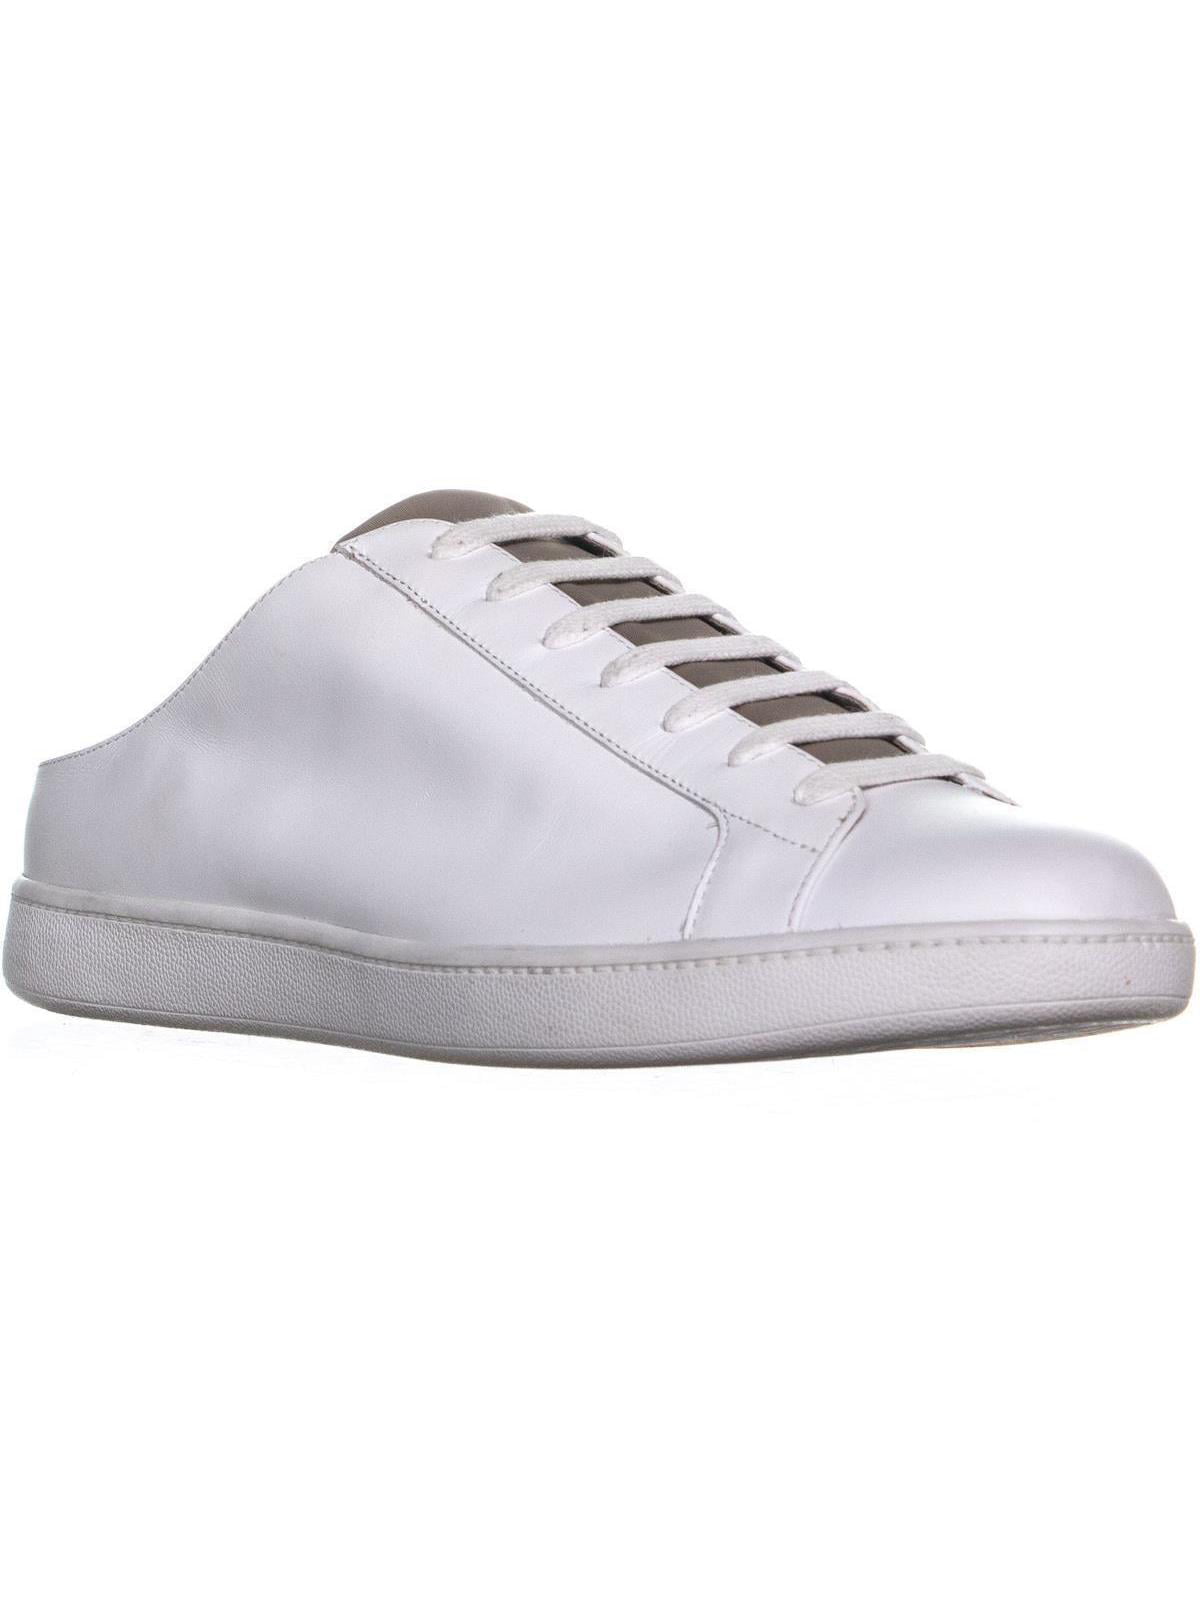 Vince Womens Varley White Leather Fashion Sneaker 